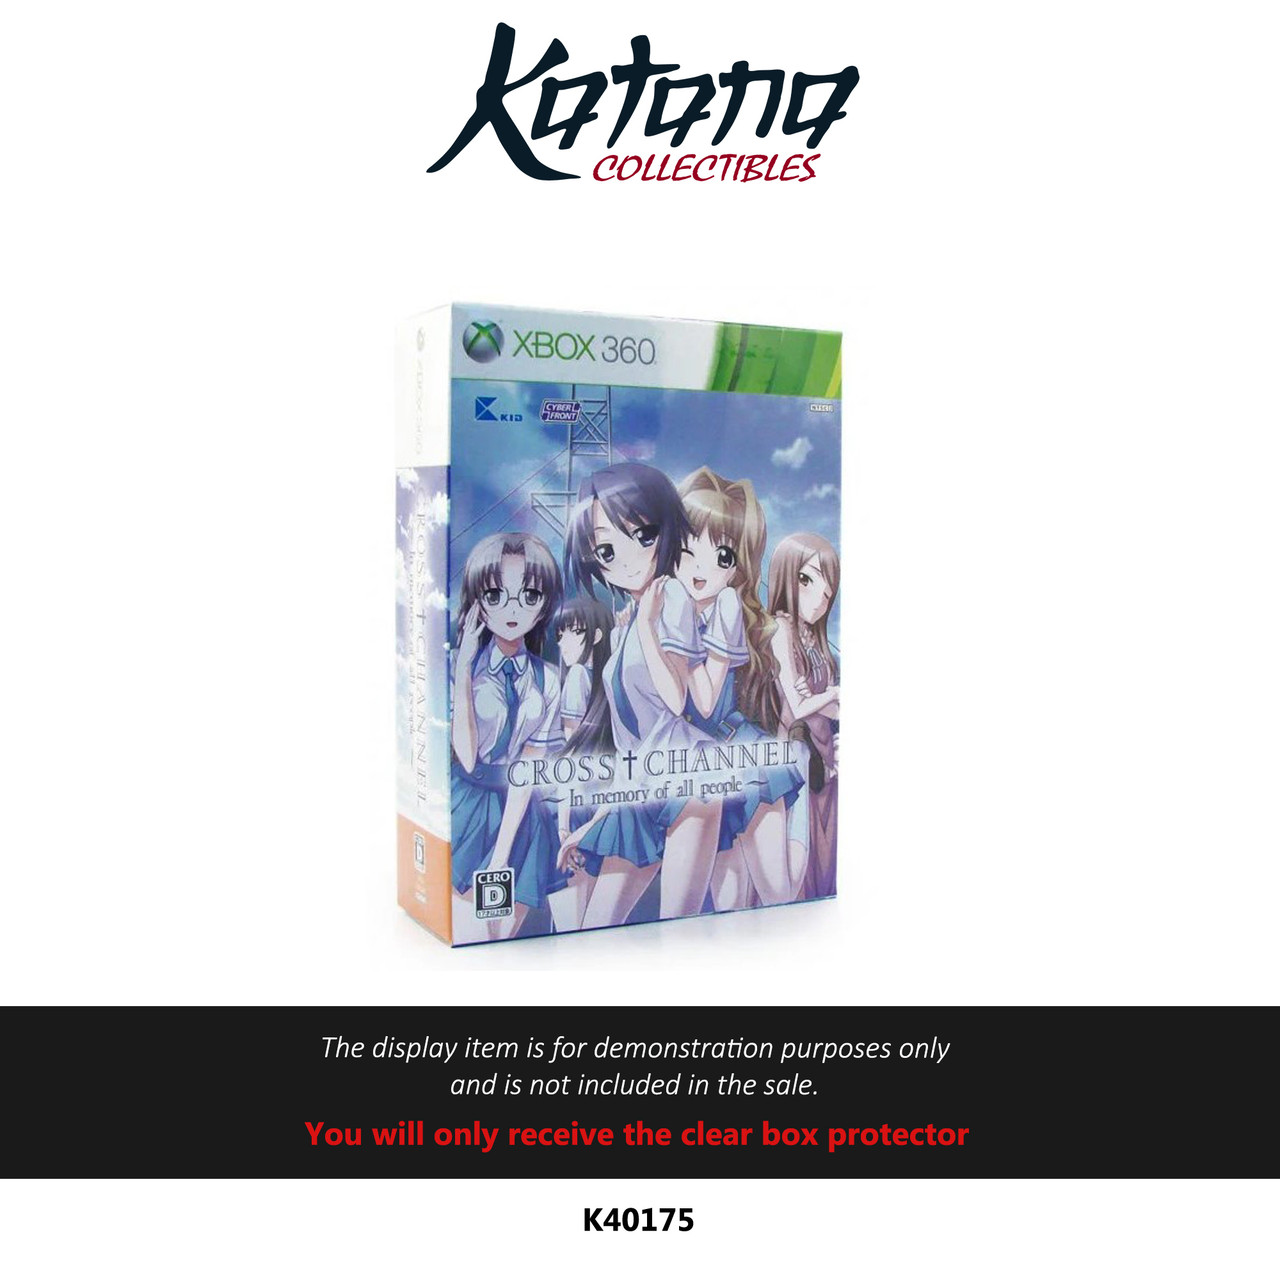 Katana Collectibles Protector For Cross Channel: In Memory Of All People Limited Edition (Japan) Xbox 360